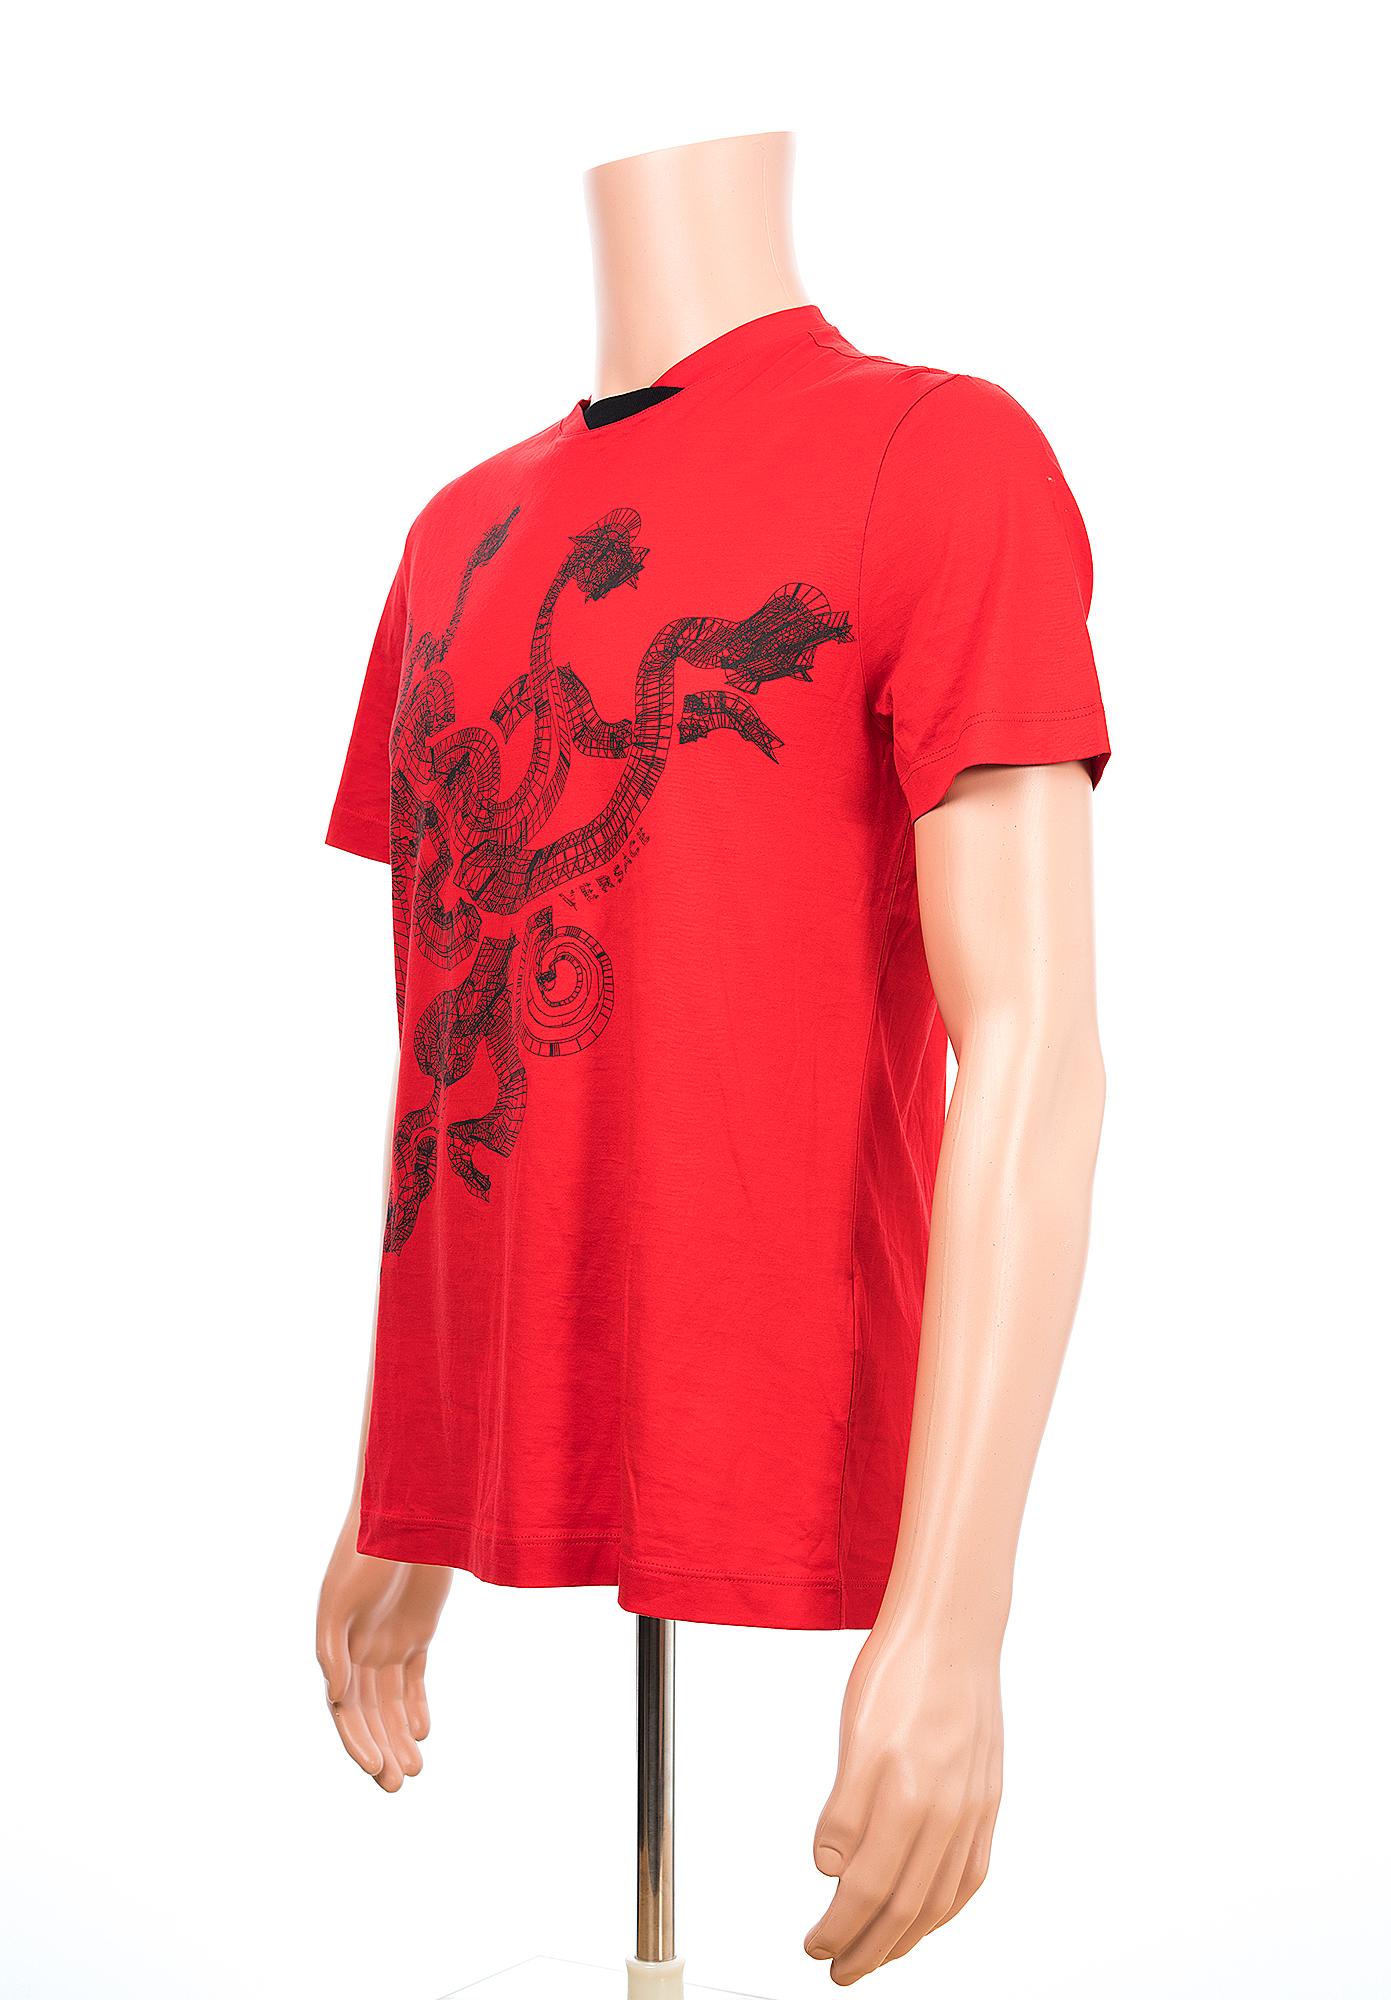 VERSACE 
Red T-Shirt with Three-Headed Dragon.

Demonstrate your taste for luxurious accessories and your love for Versace 
with this graphic three-headed dragon print T - shirt.

A timeless yet trendy t-shirt that's sure to turn heads.
Color: